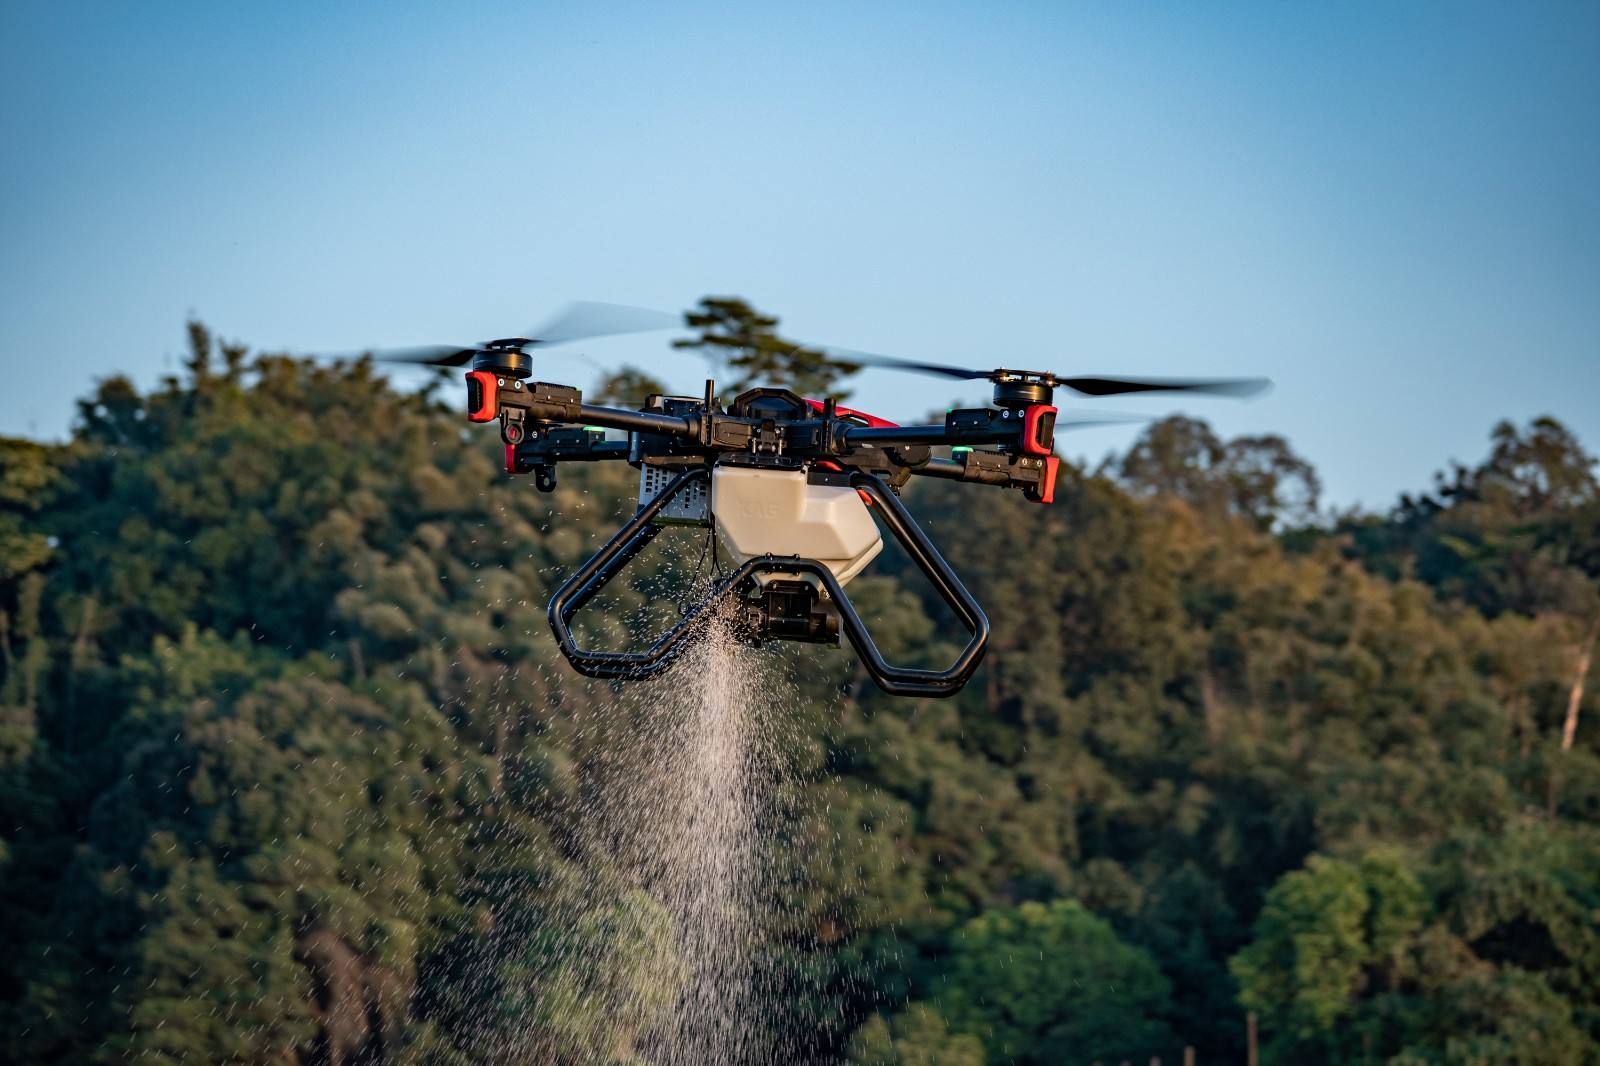 P100 Agricultural Drone equipped with RevoCast 2.0 system